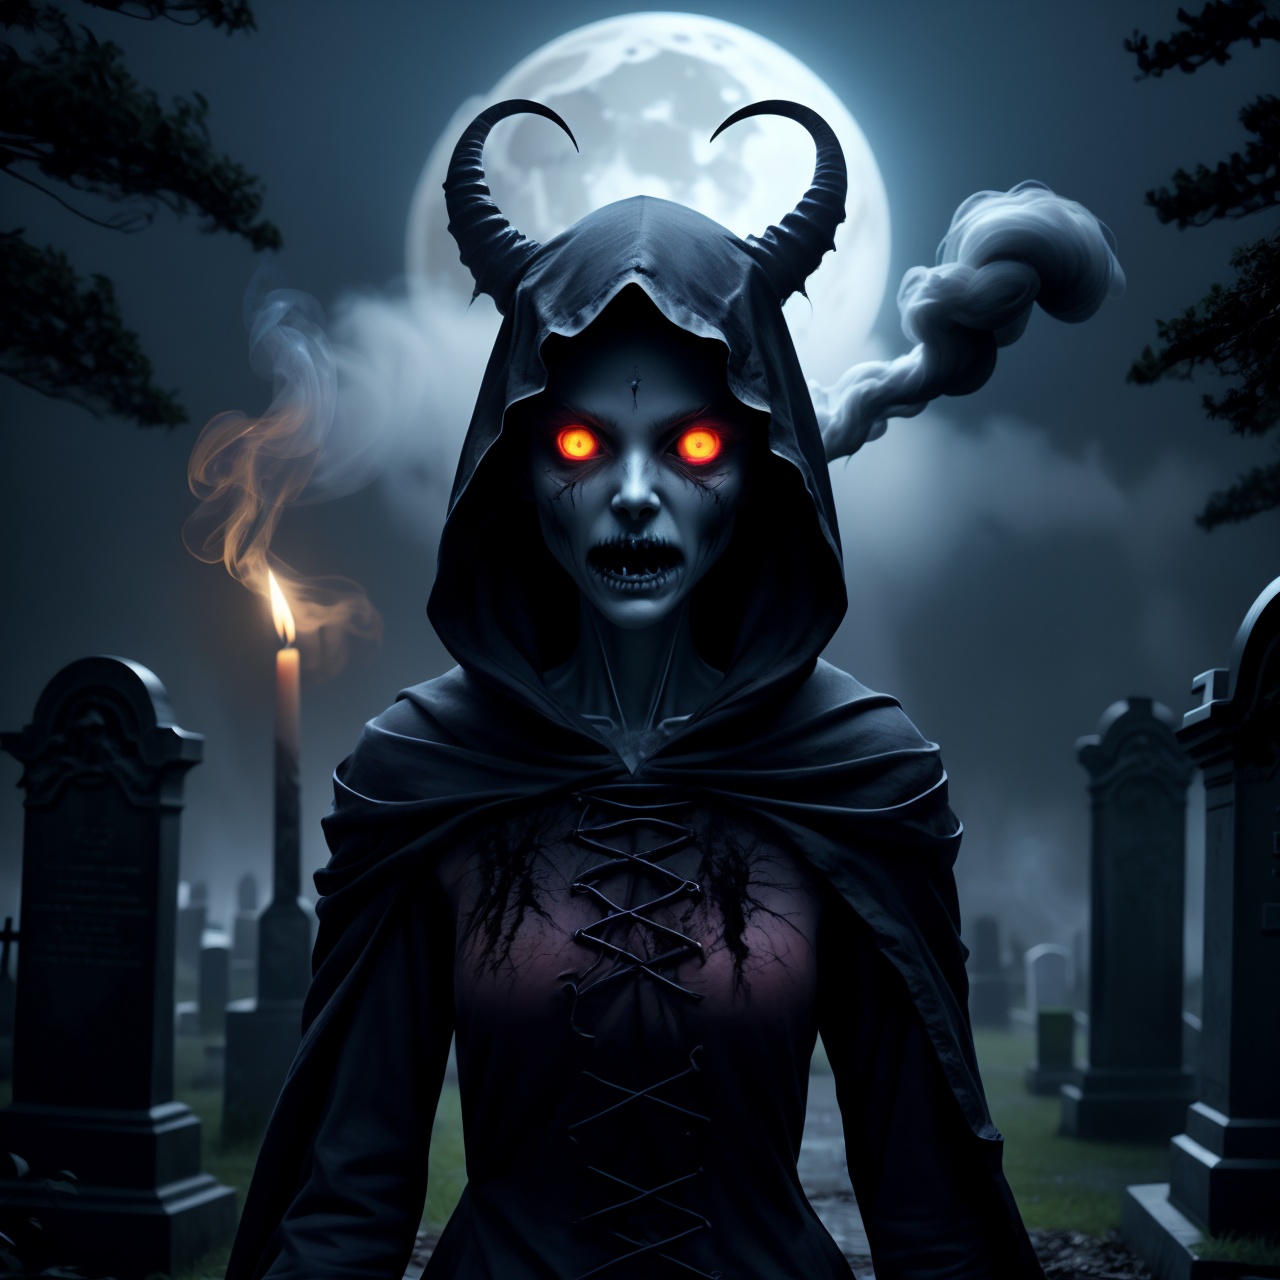 fantchar, a frightening creature with a demonic face and a wraith body walking through a foggy moonlit cemetery at night, ghostly, hooded, fire eyes, transparent, spectral, vapor, realistic, candles, moon, ceremonial, smoke, creepy, terrifying, terror, horror, pentagram, highly detailed, intricate